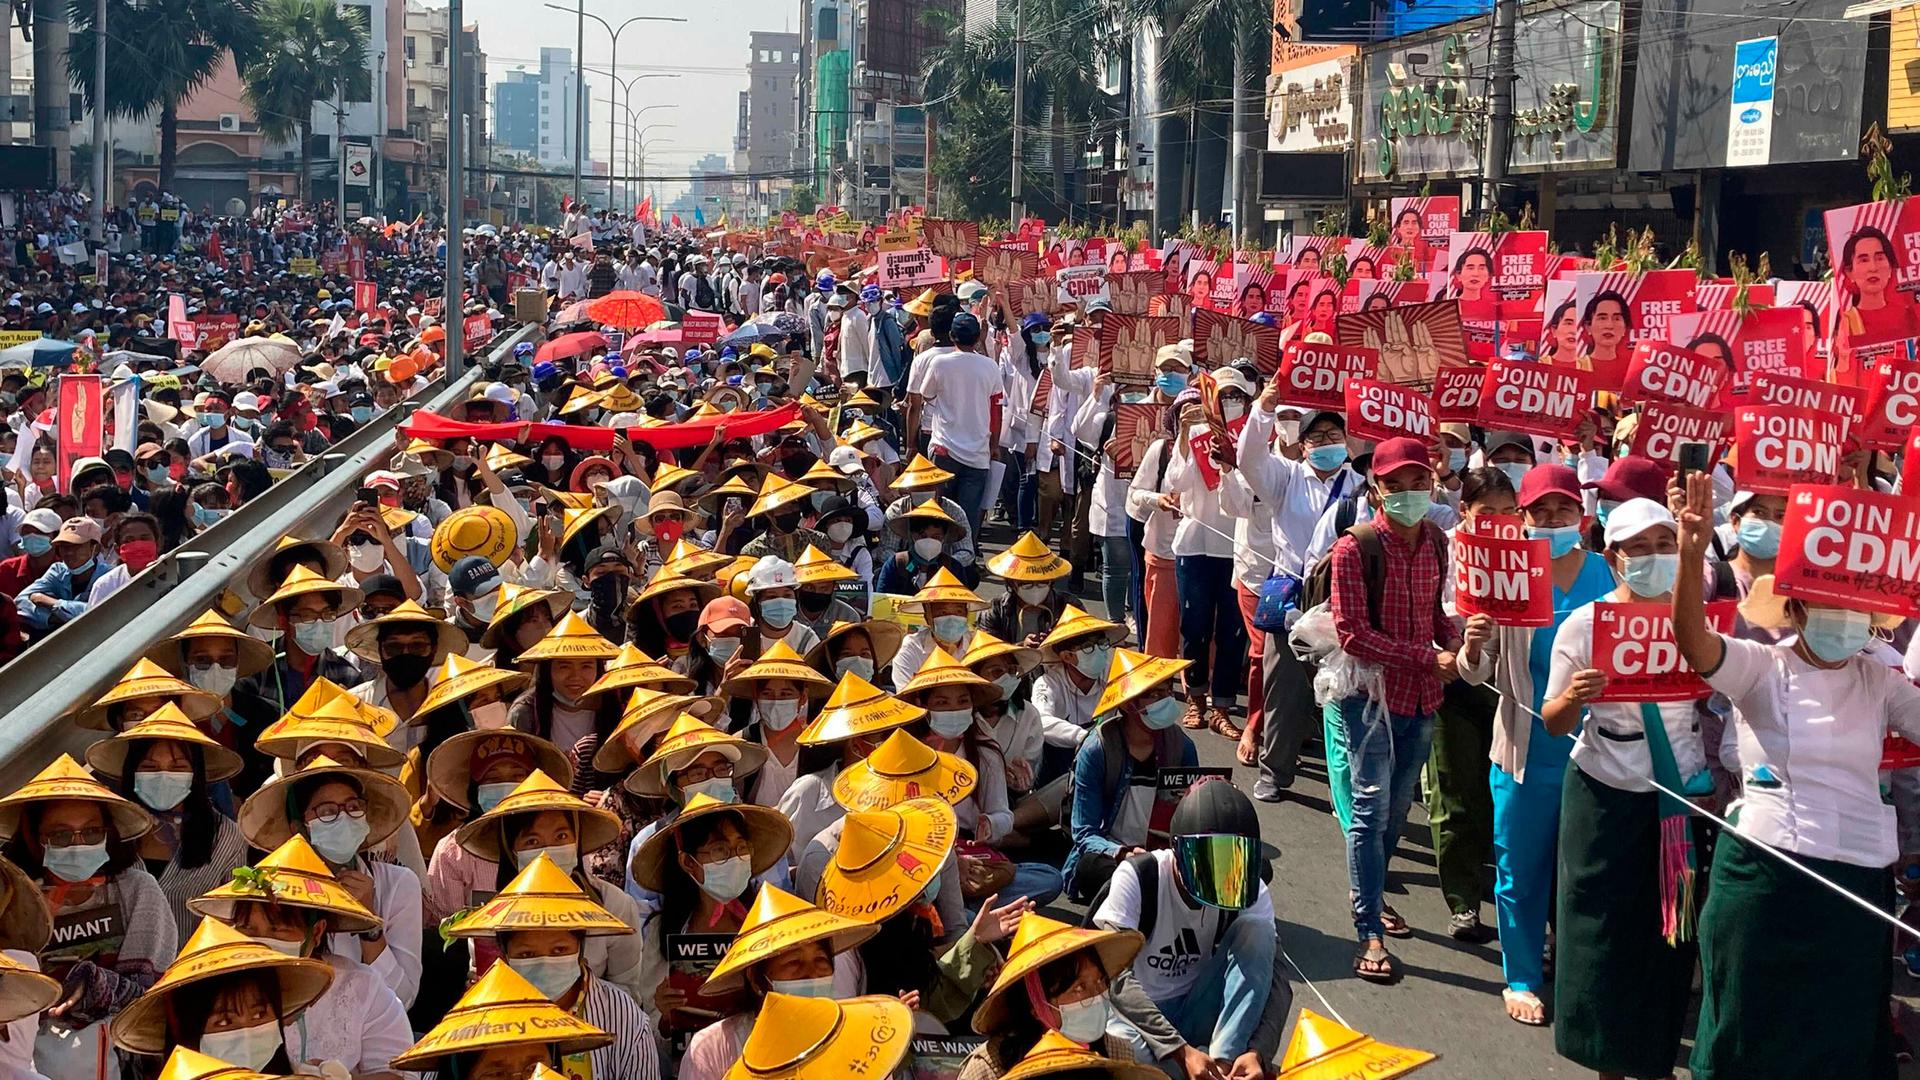 A large crowd of people are shown filling a street with many wearing traditional Asian hats and carrying red signs.